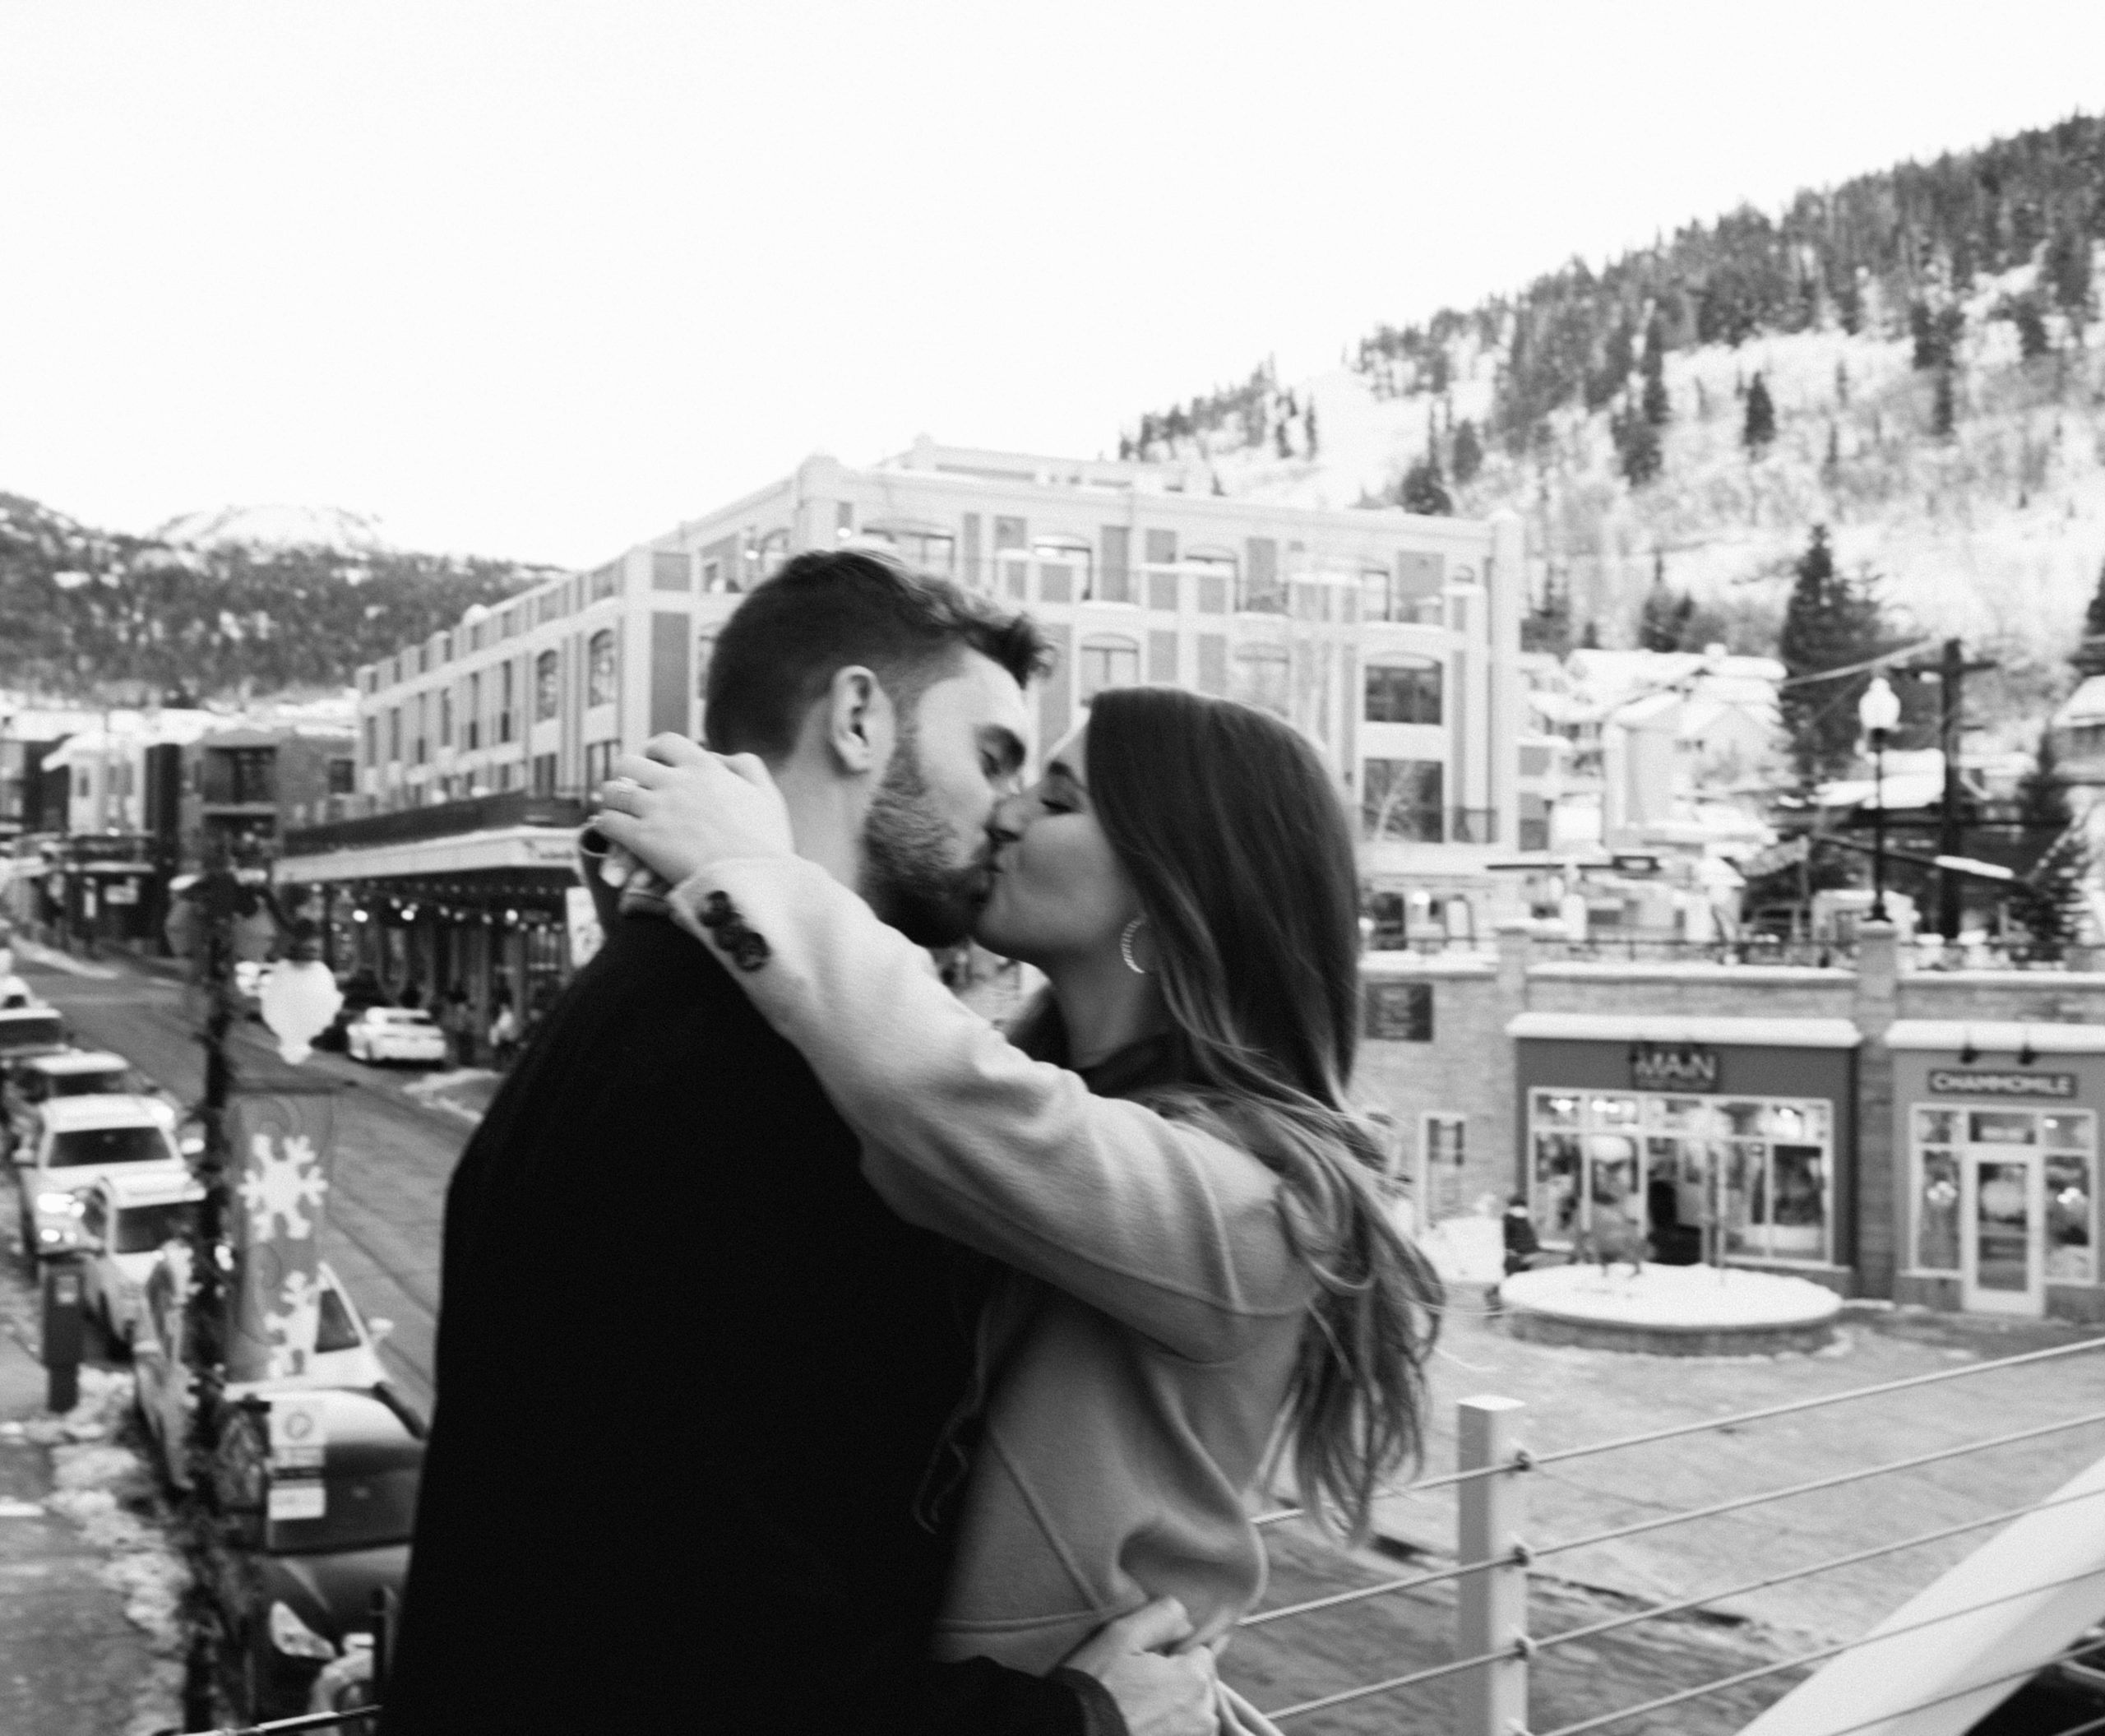 a couple kisses during city winter engagement photos overlooking downtown park city Utah. photo taken by Megan Robinson Photography